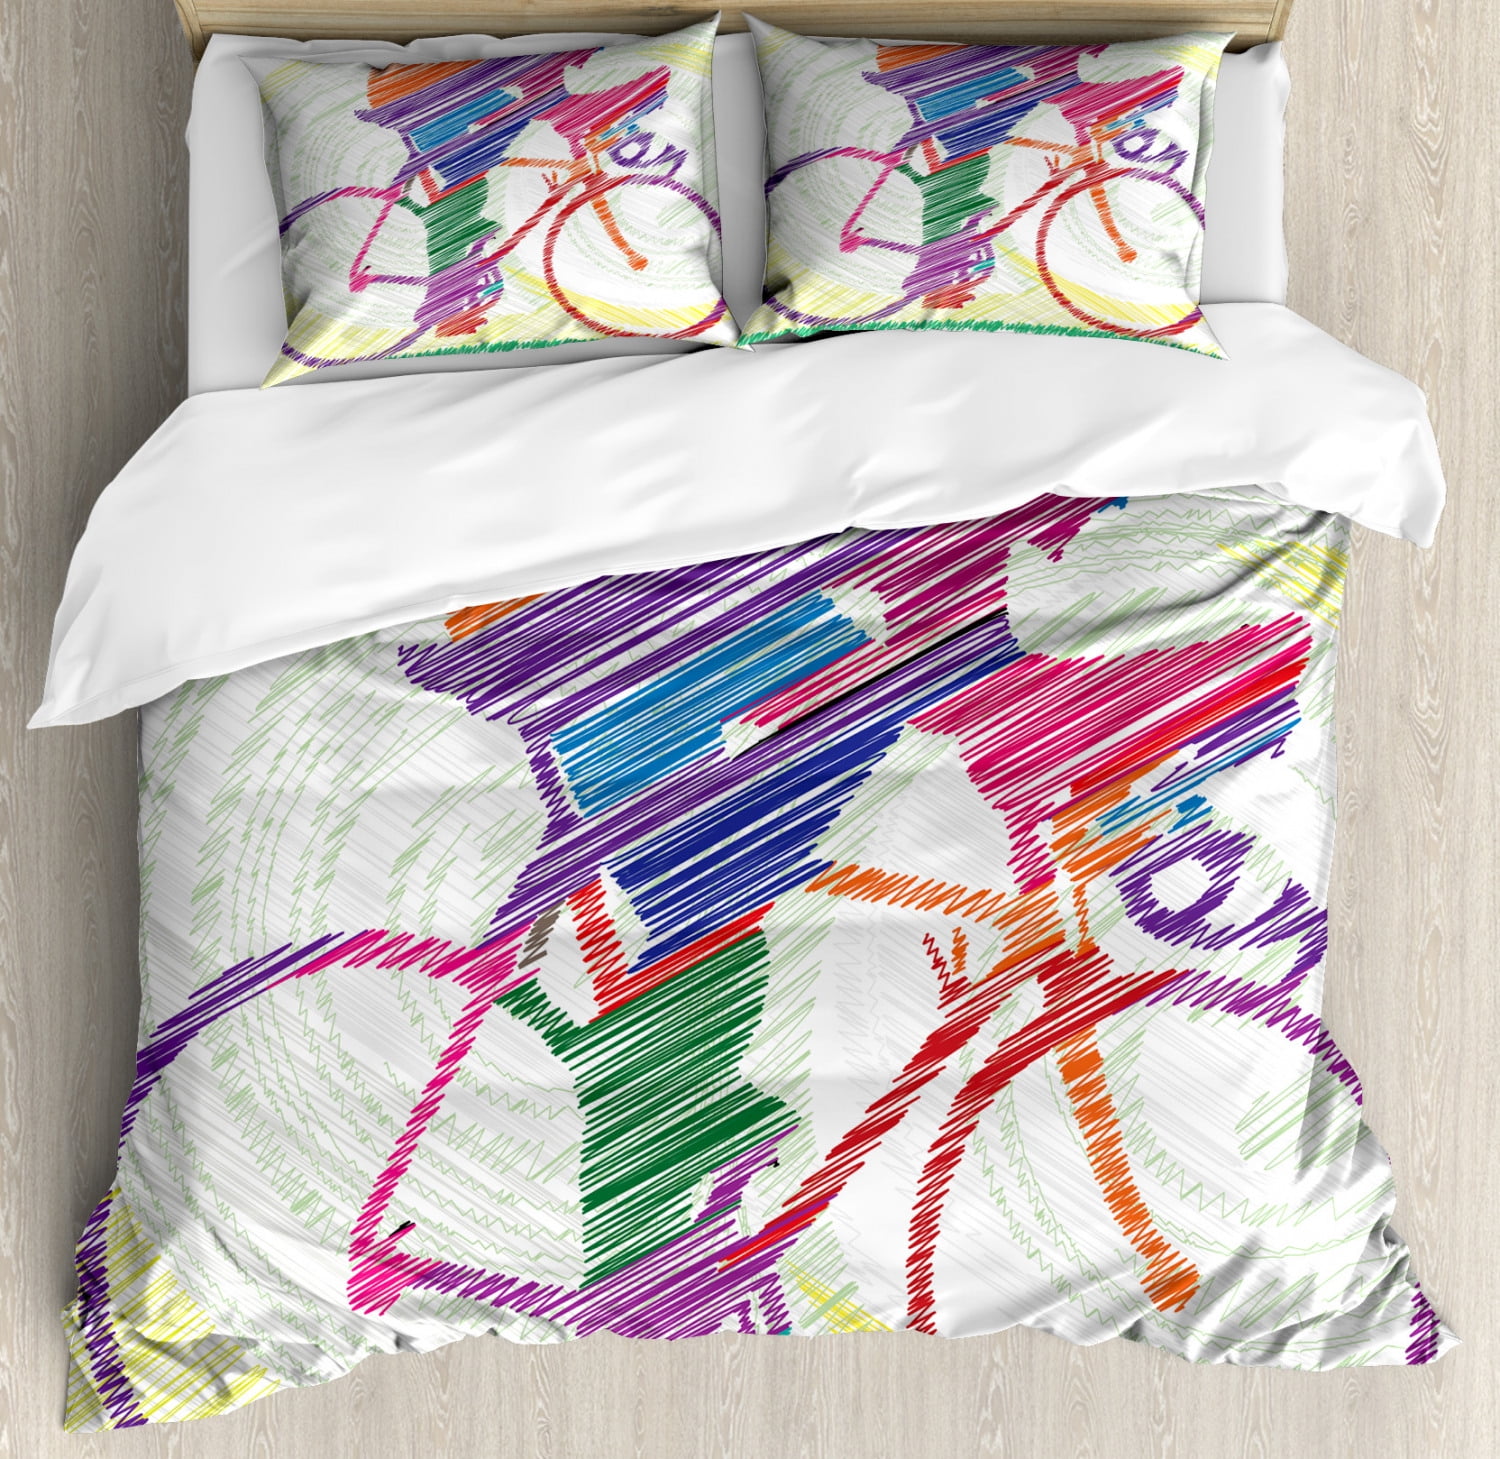 PHRASES TEENS Comforter TWIN Bedding GIFT Bedding Girls Reversible Decoration NW 